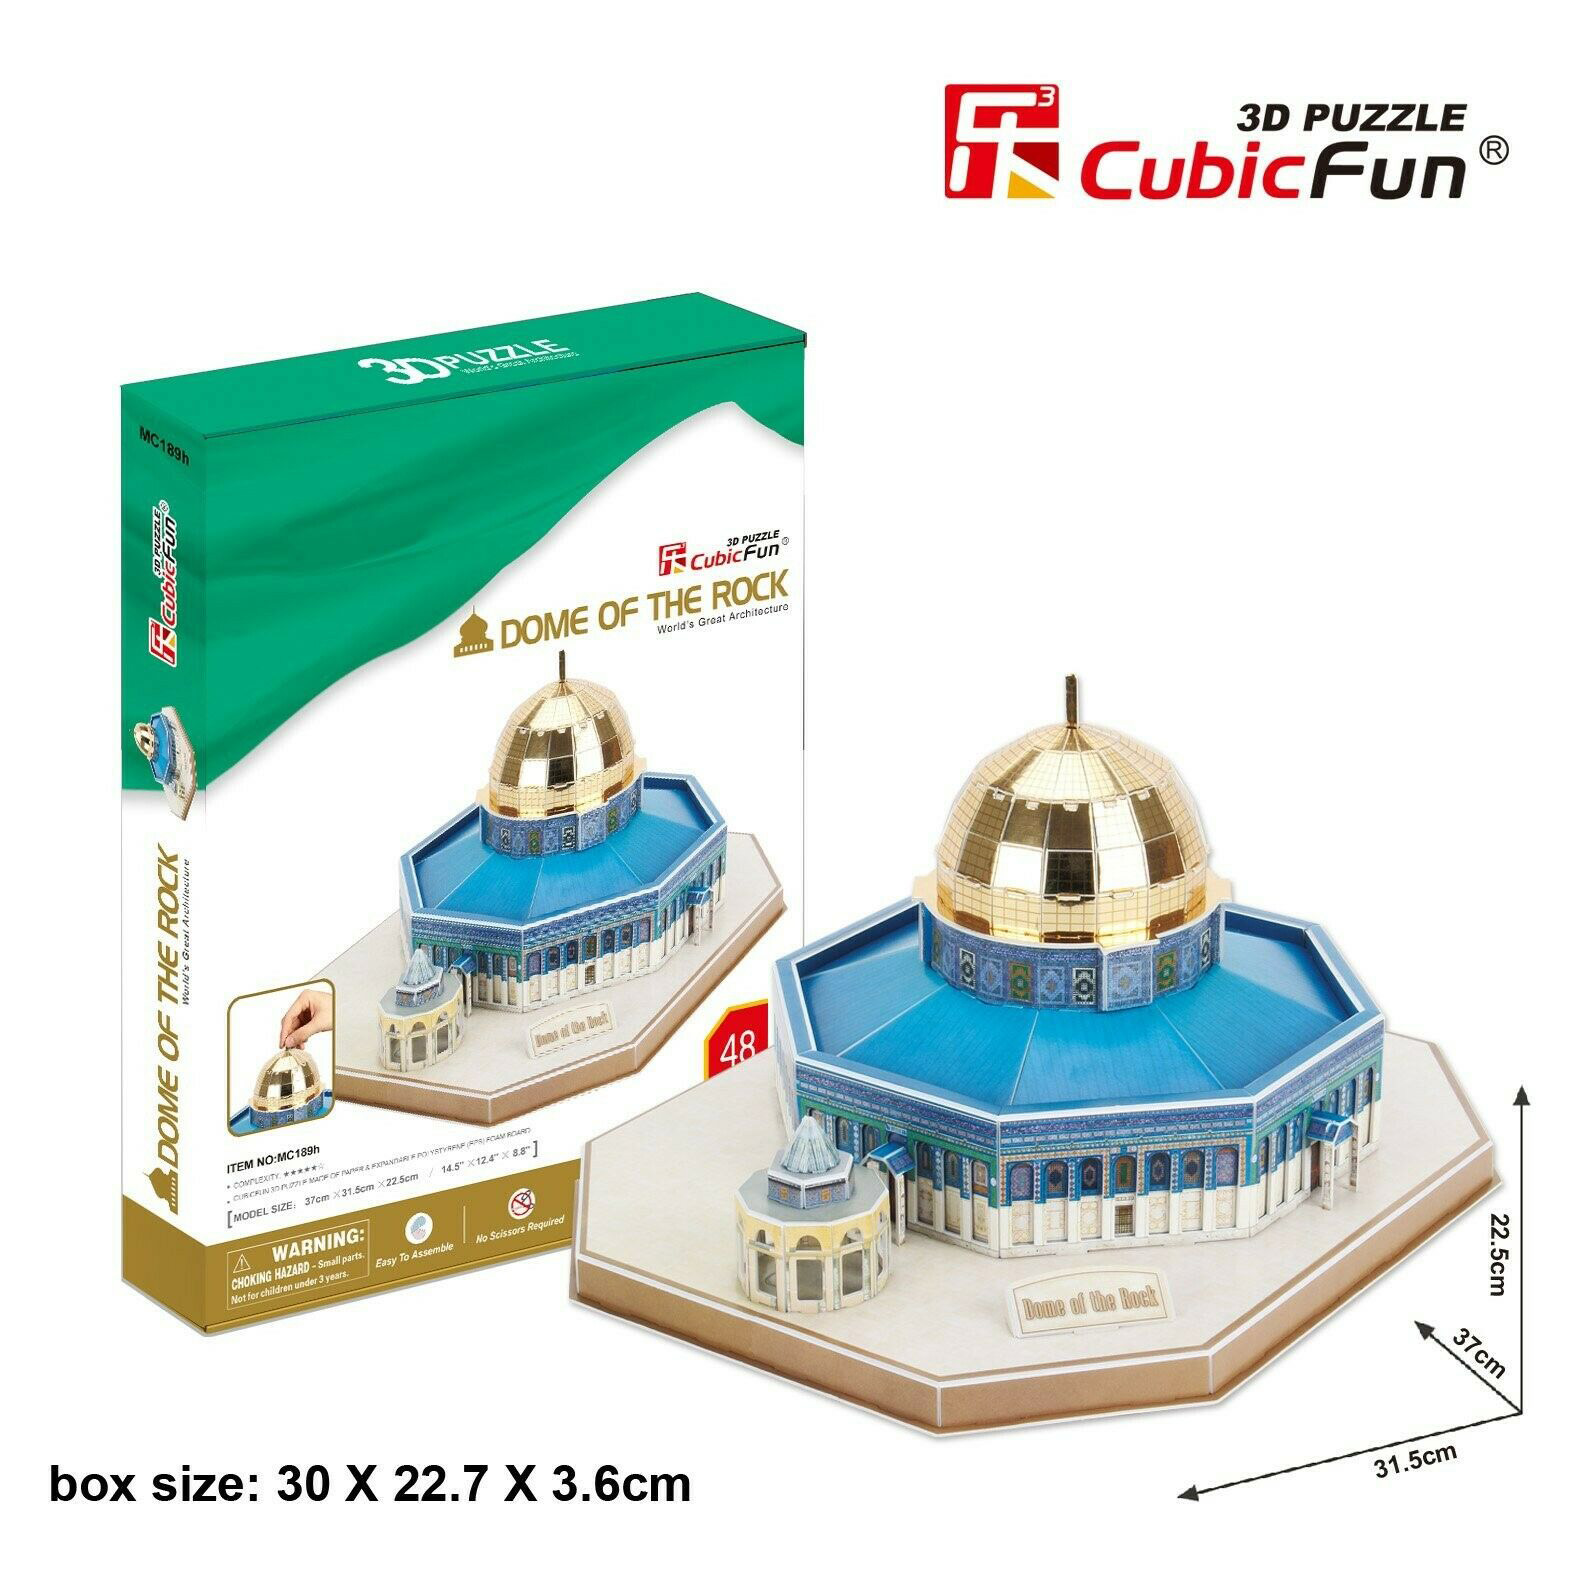 Dome of the Rock Landmarks & Monuments 3D Puzzle